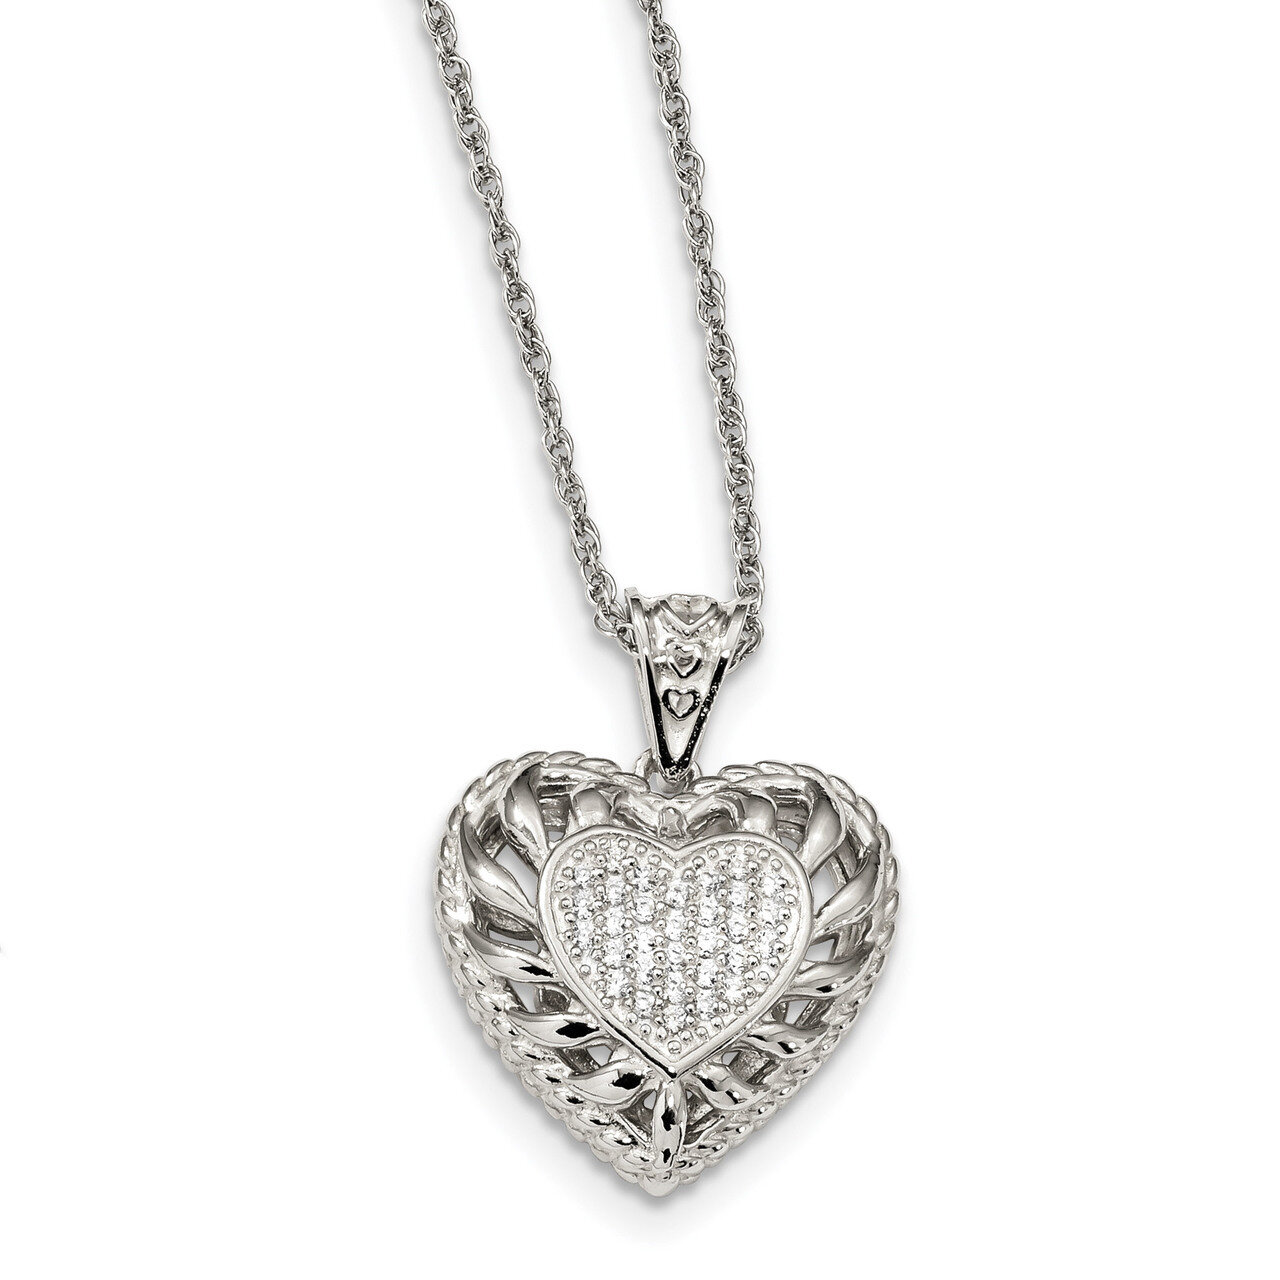 CZ Diamond Heart Necklace 17 Inch Sterling Silver QG4613-17